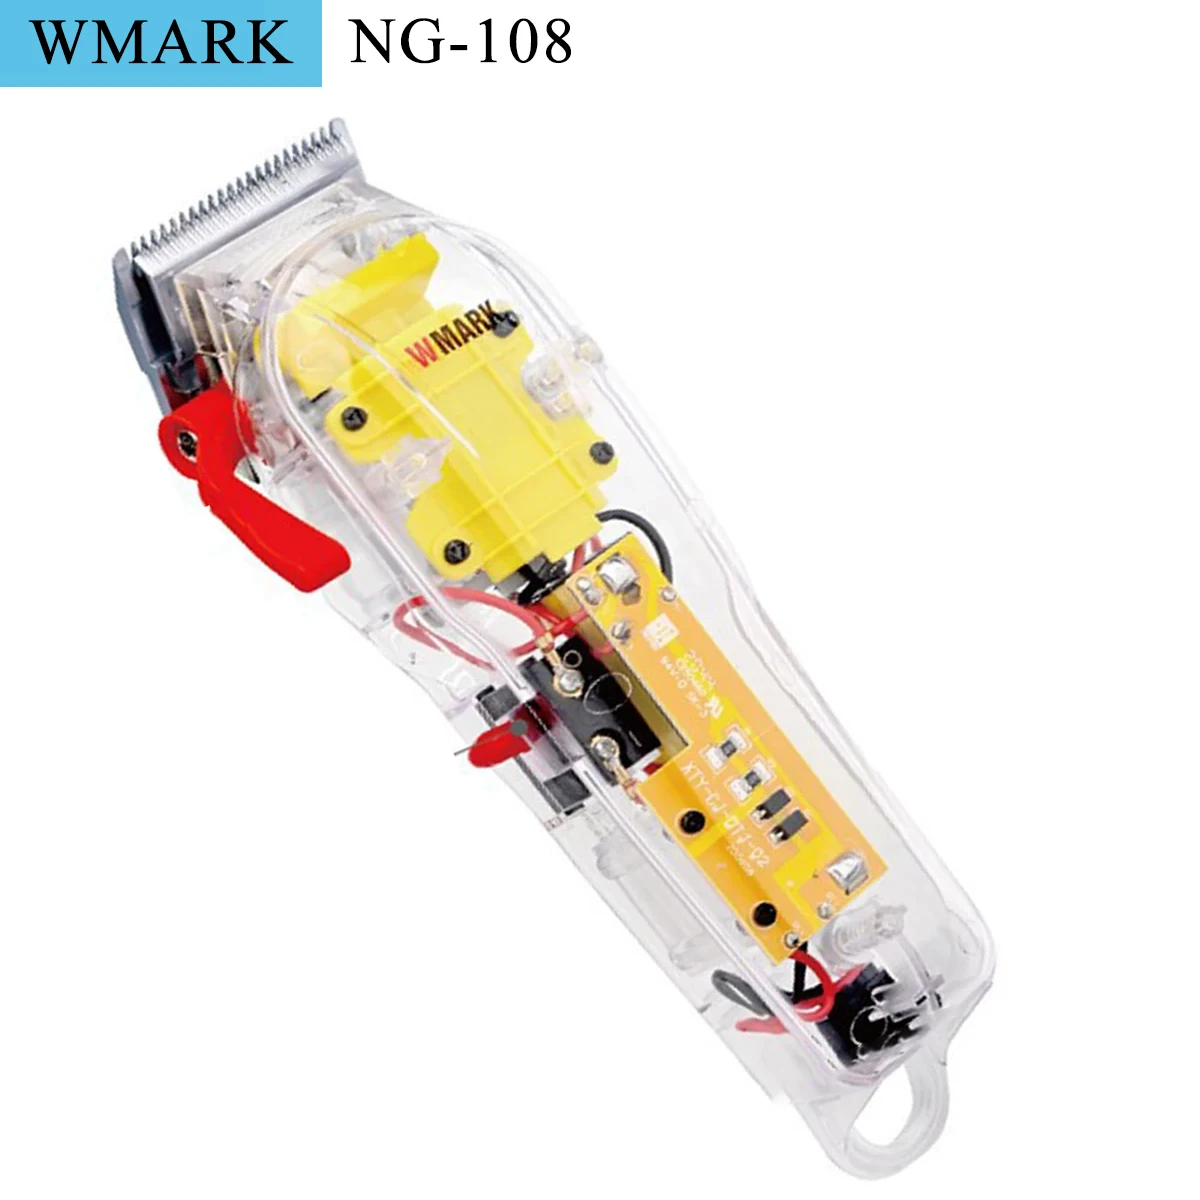 

WMARK Hair Clipper Trimmer For Men Hair Cutting Shaving Machine Electr Shaver Clippers Trimmers Barber Hair Shaver NG-108